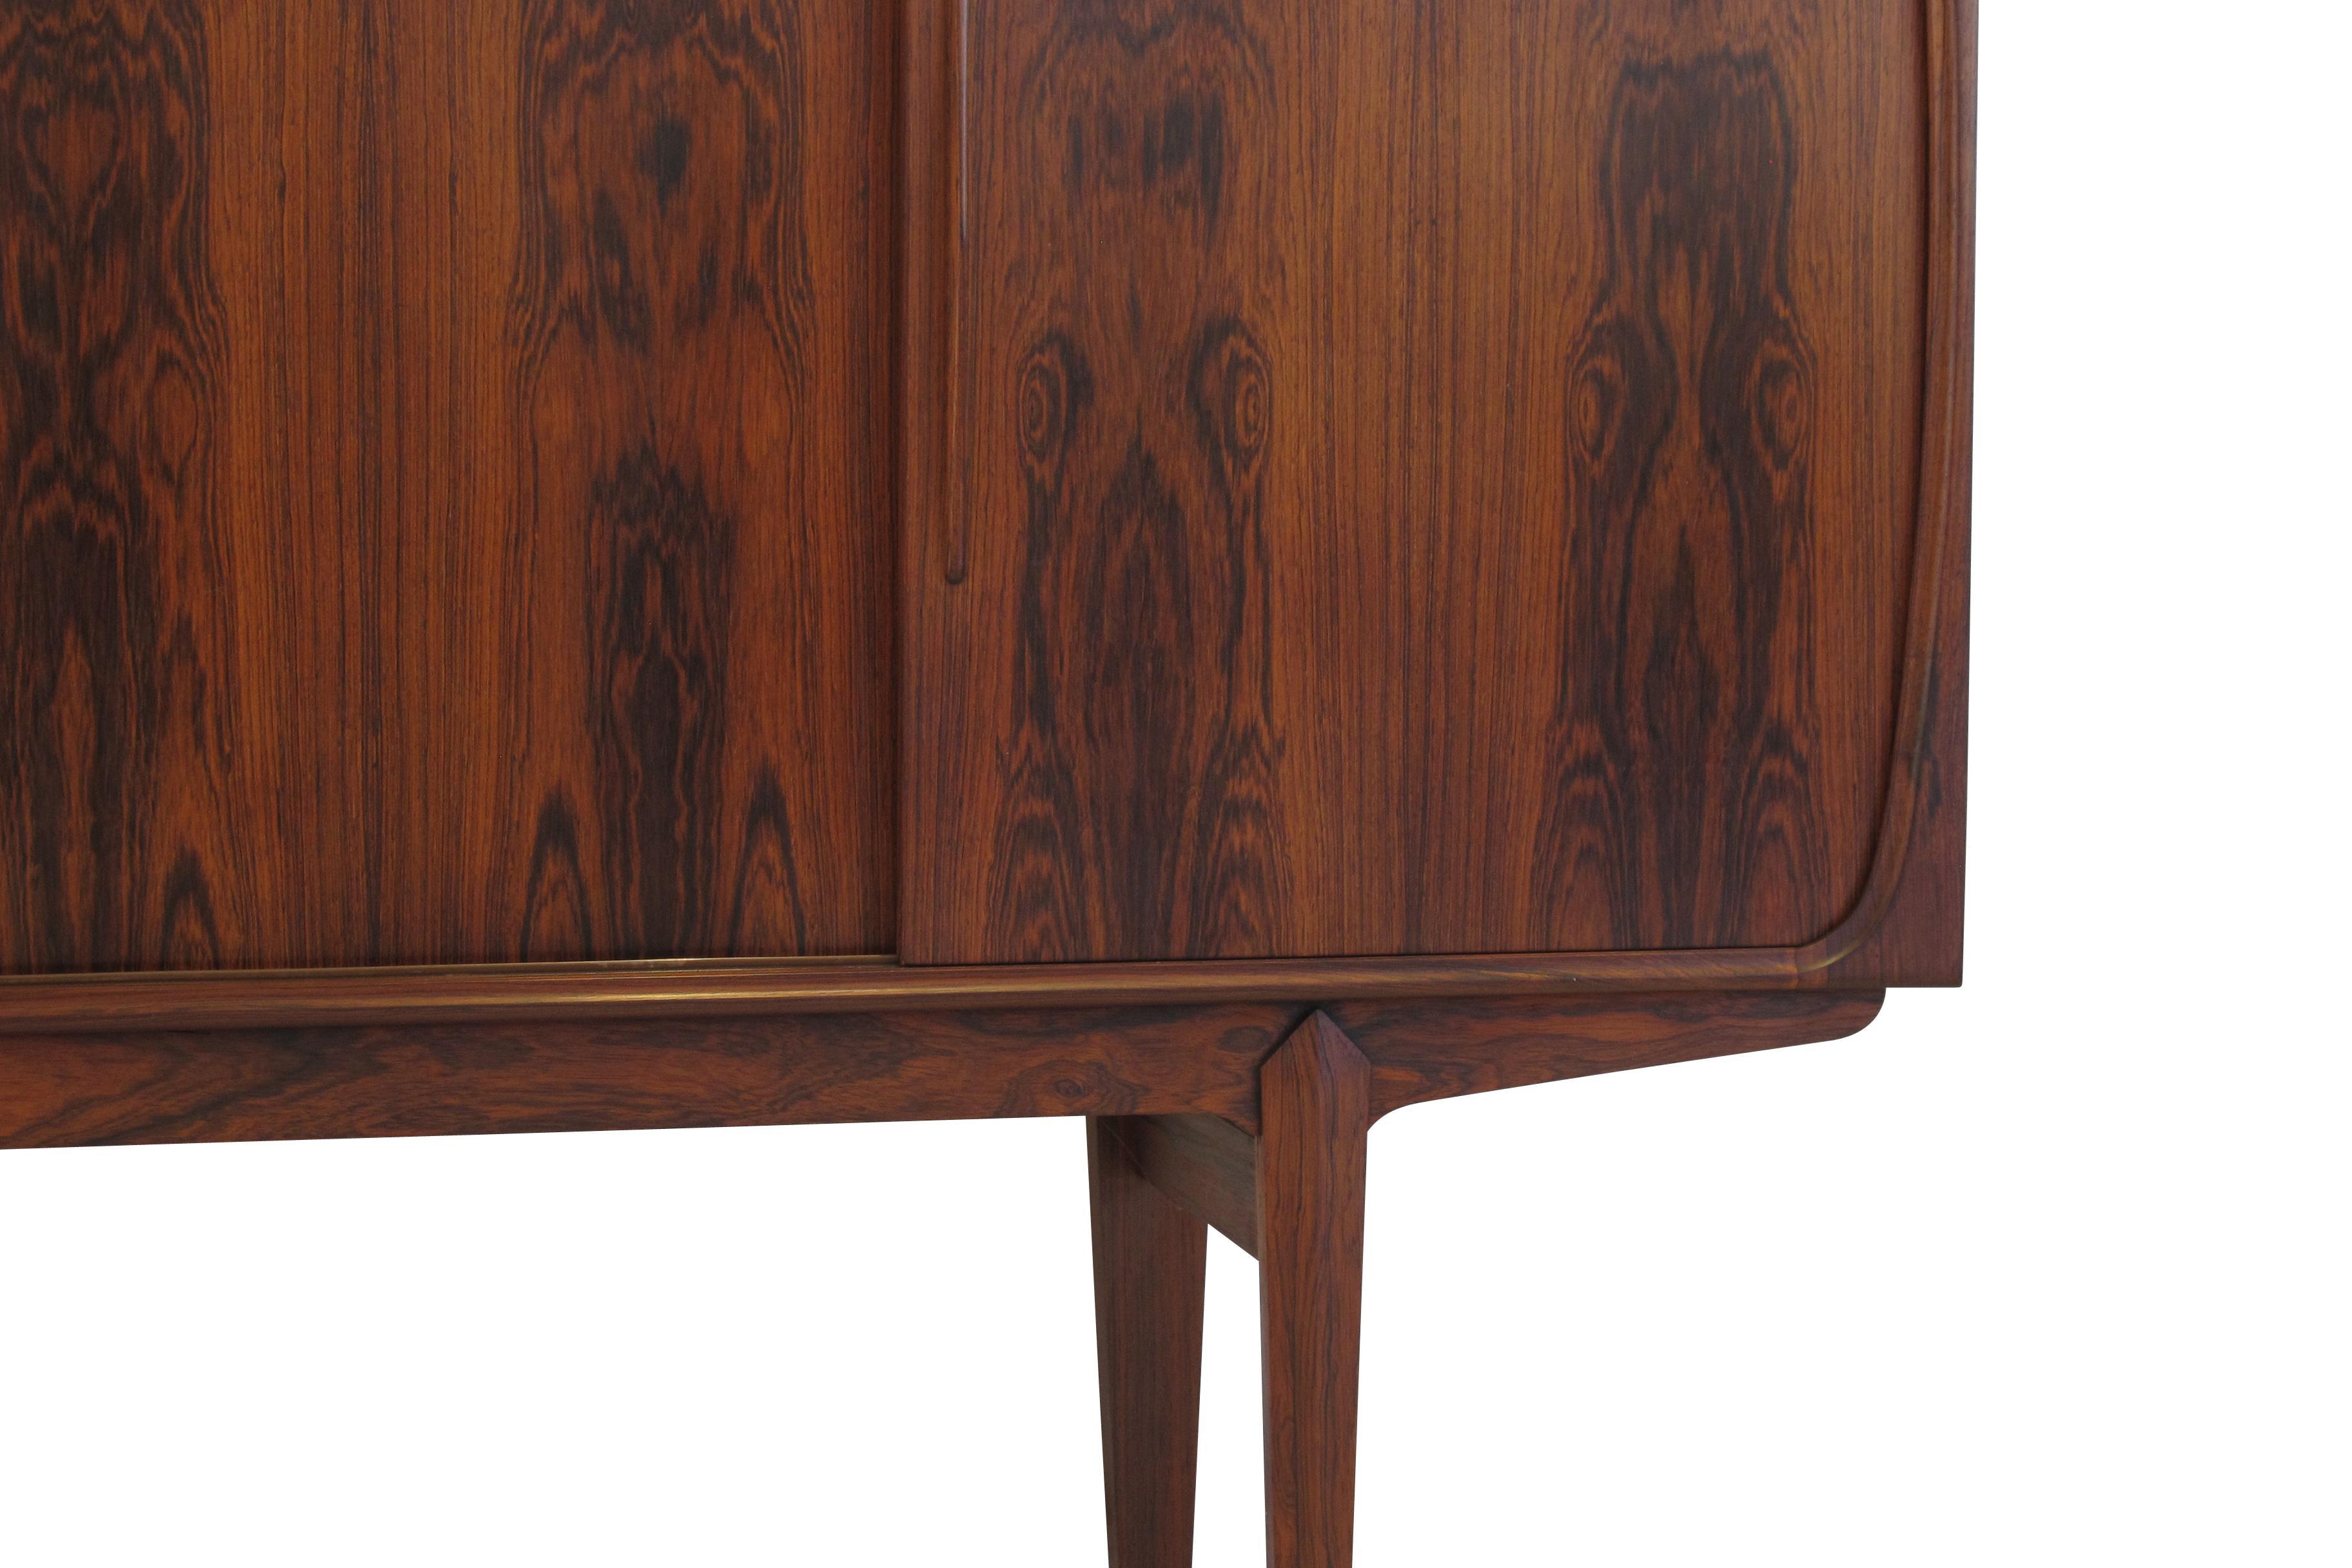 Brazilian rosewood credenza with figured book-matched grain raised on stilted legs. Four sliding doors with sculpted pulls reveal a mahogany interior with adjustable shelves. The middle section features a mirrored bar with eight silverware drawers